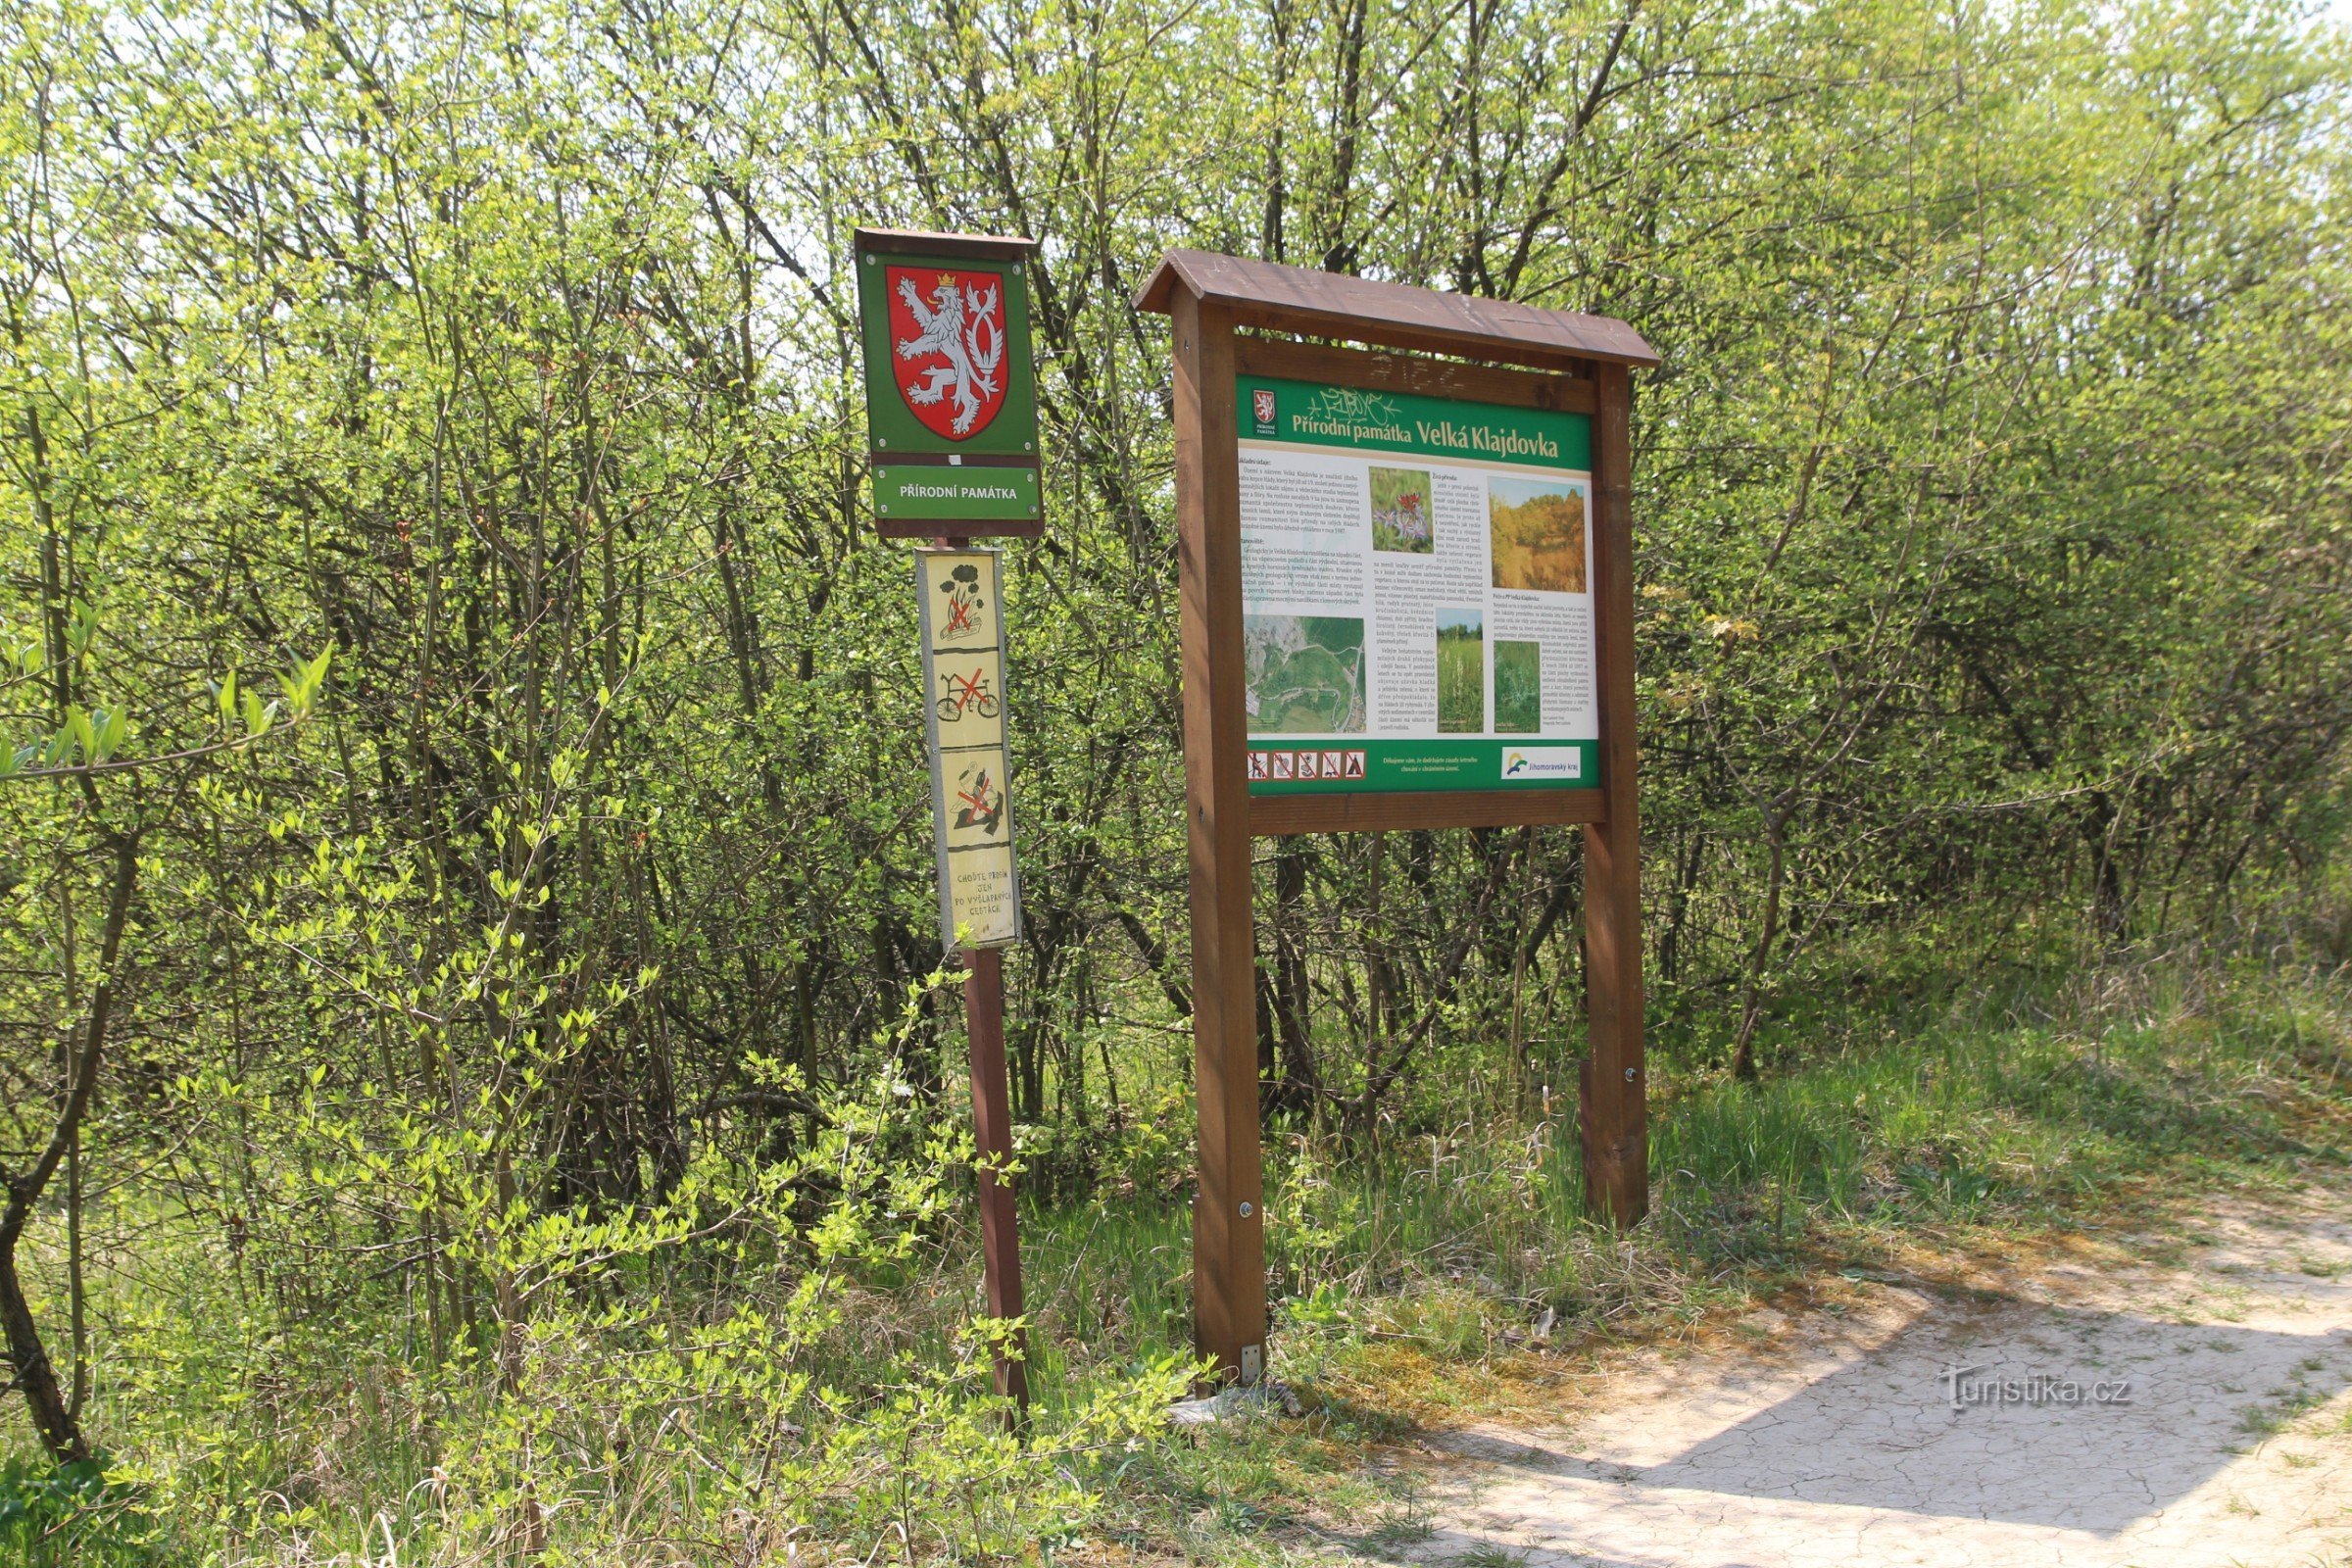 Information board on the edge of the site